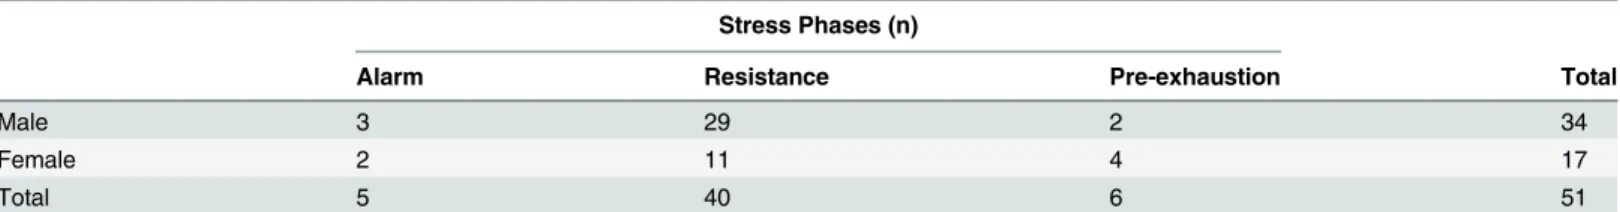 Table 3. Incidence of stress phases in business executives assessed by Lipp Inventory of Stress Symptoms for Adults (ISSL) and gender differences.